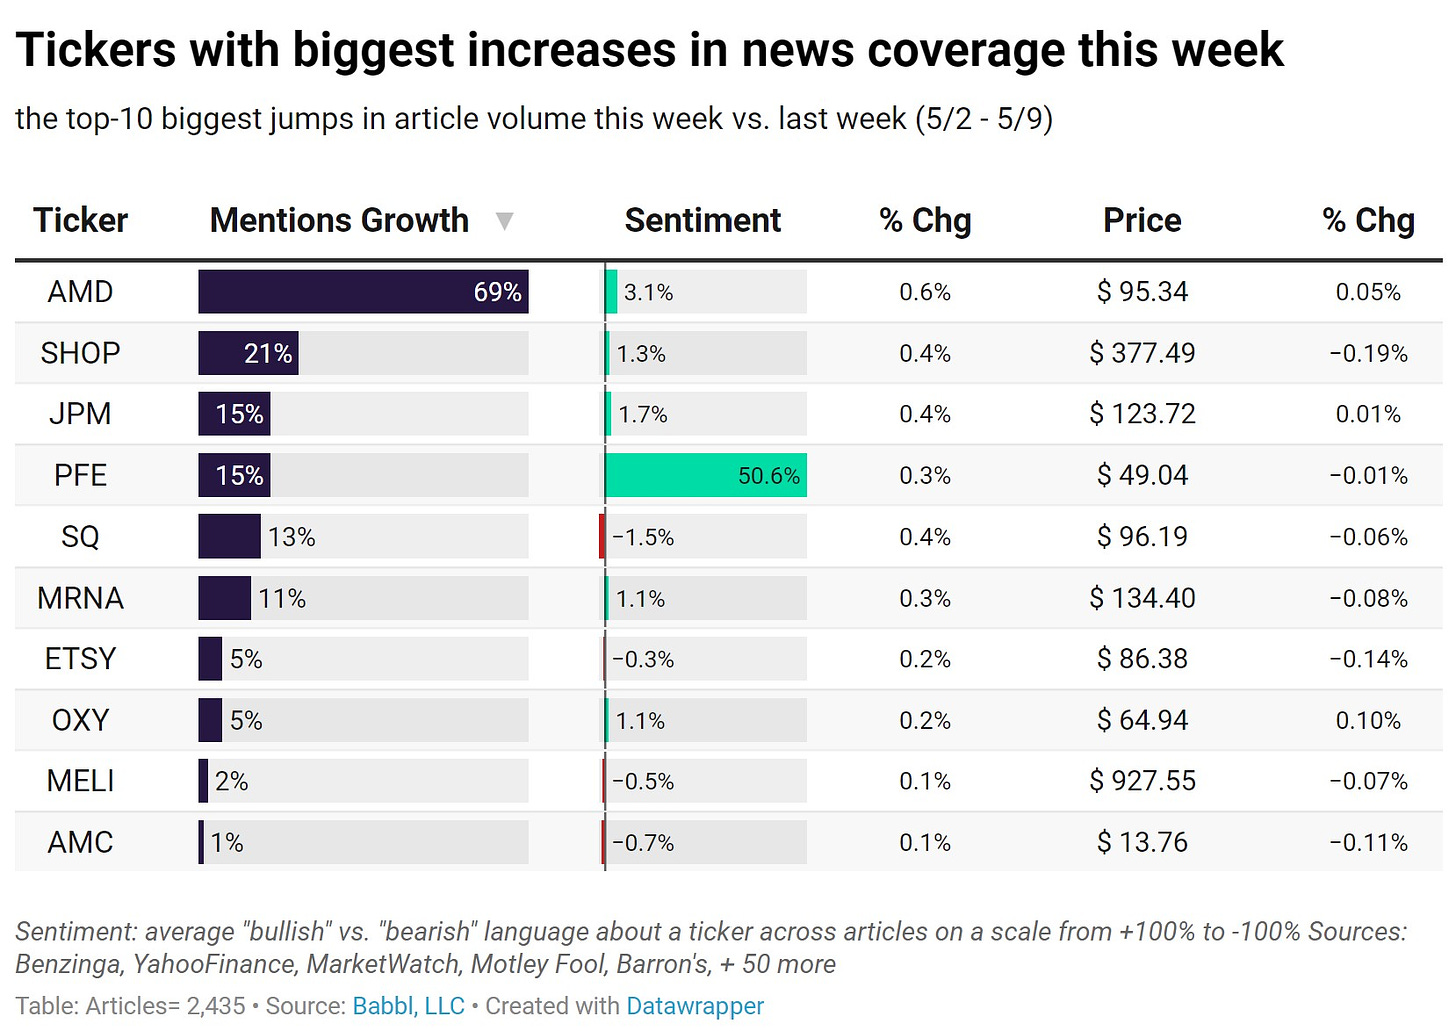 Top 10 tickers with biggest increases in news coverage this week